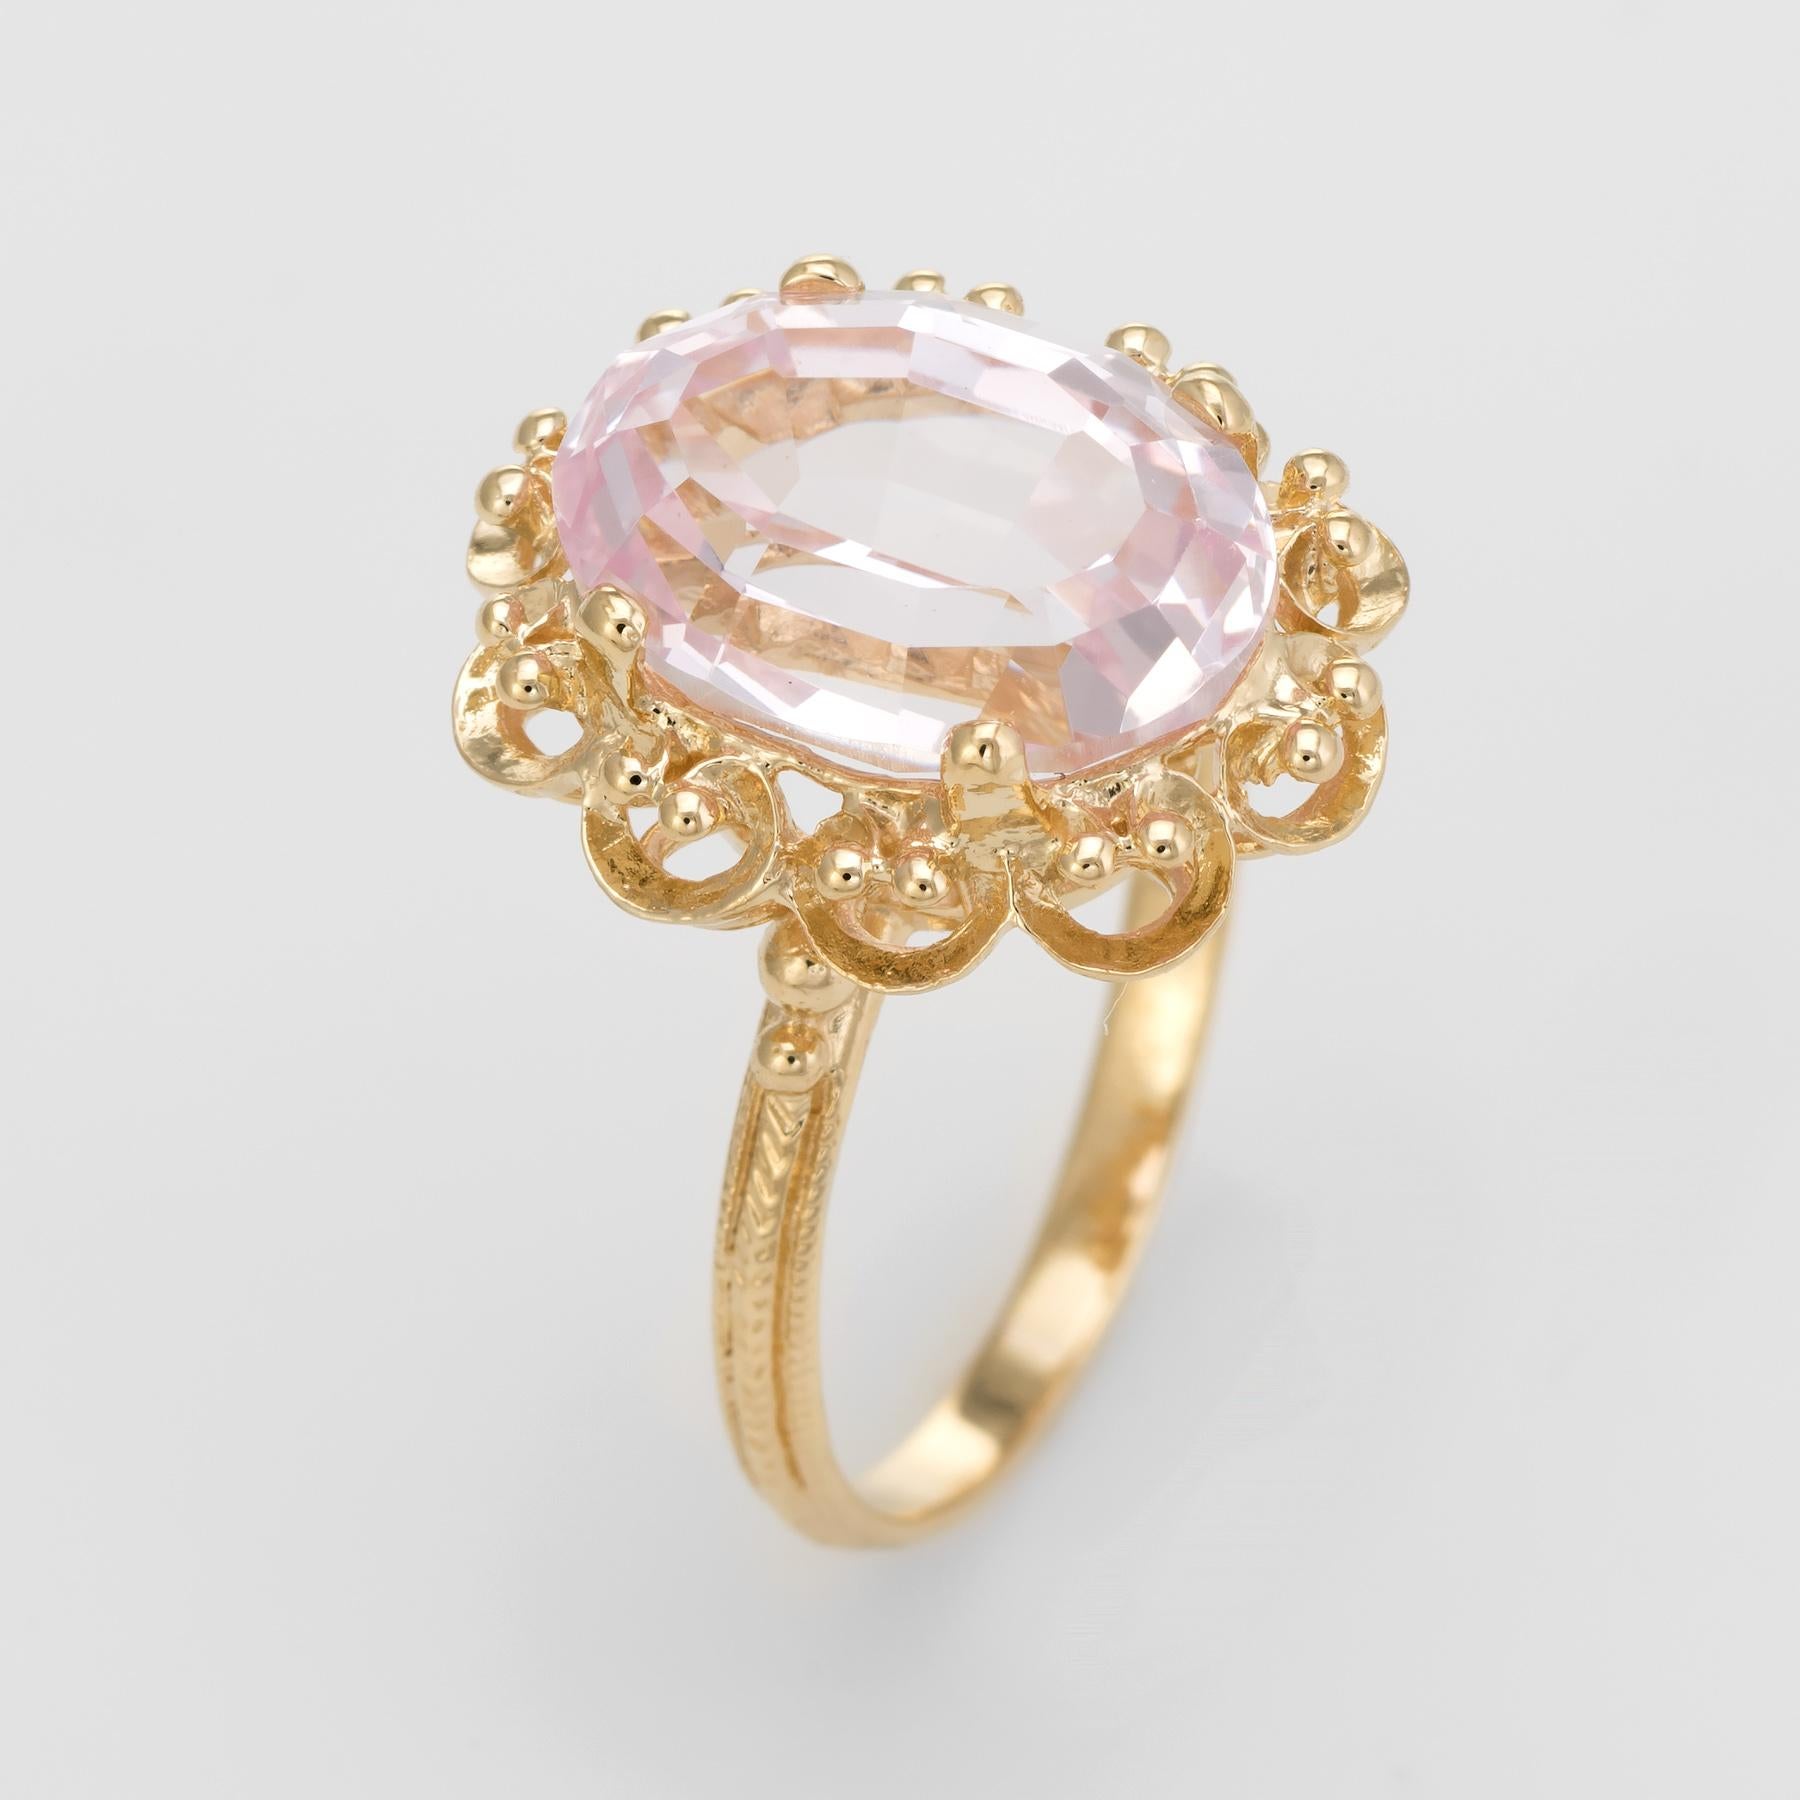 Finely detailed vintage cocktail ring, crafted in 18 karat yellow gold. 

Centrally mounted oval faceted kunzite measures 14mm x 10mm (estimated at 8 carats). The kunzite is in excellent condition and free of cracks or chips.   

The ring is in